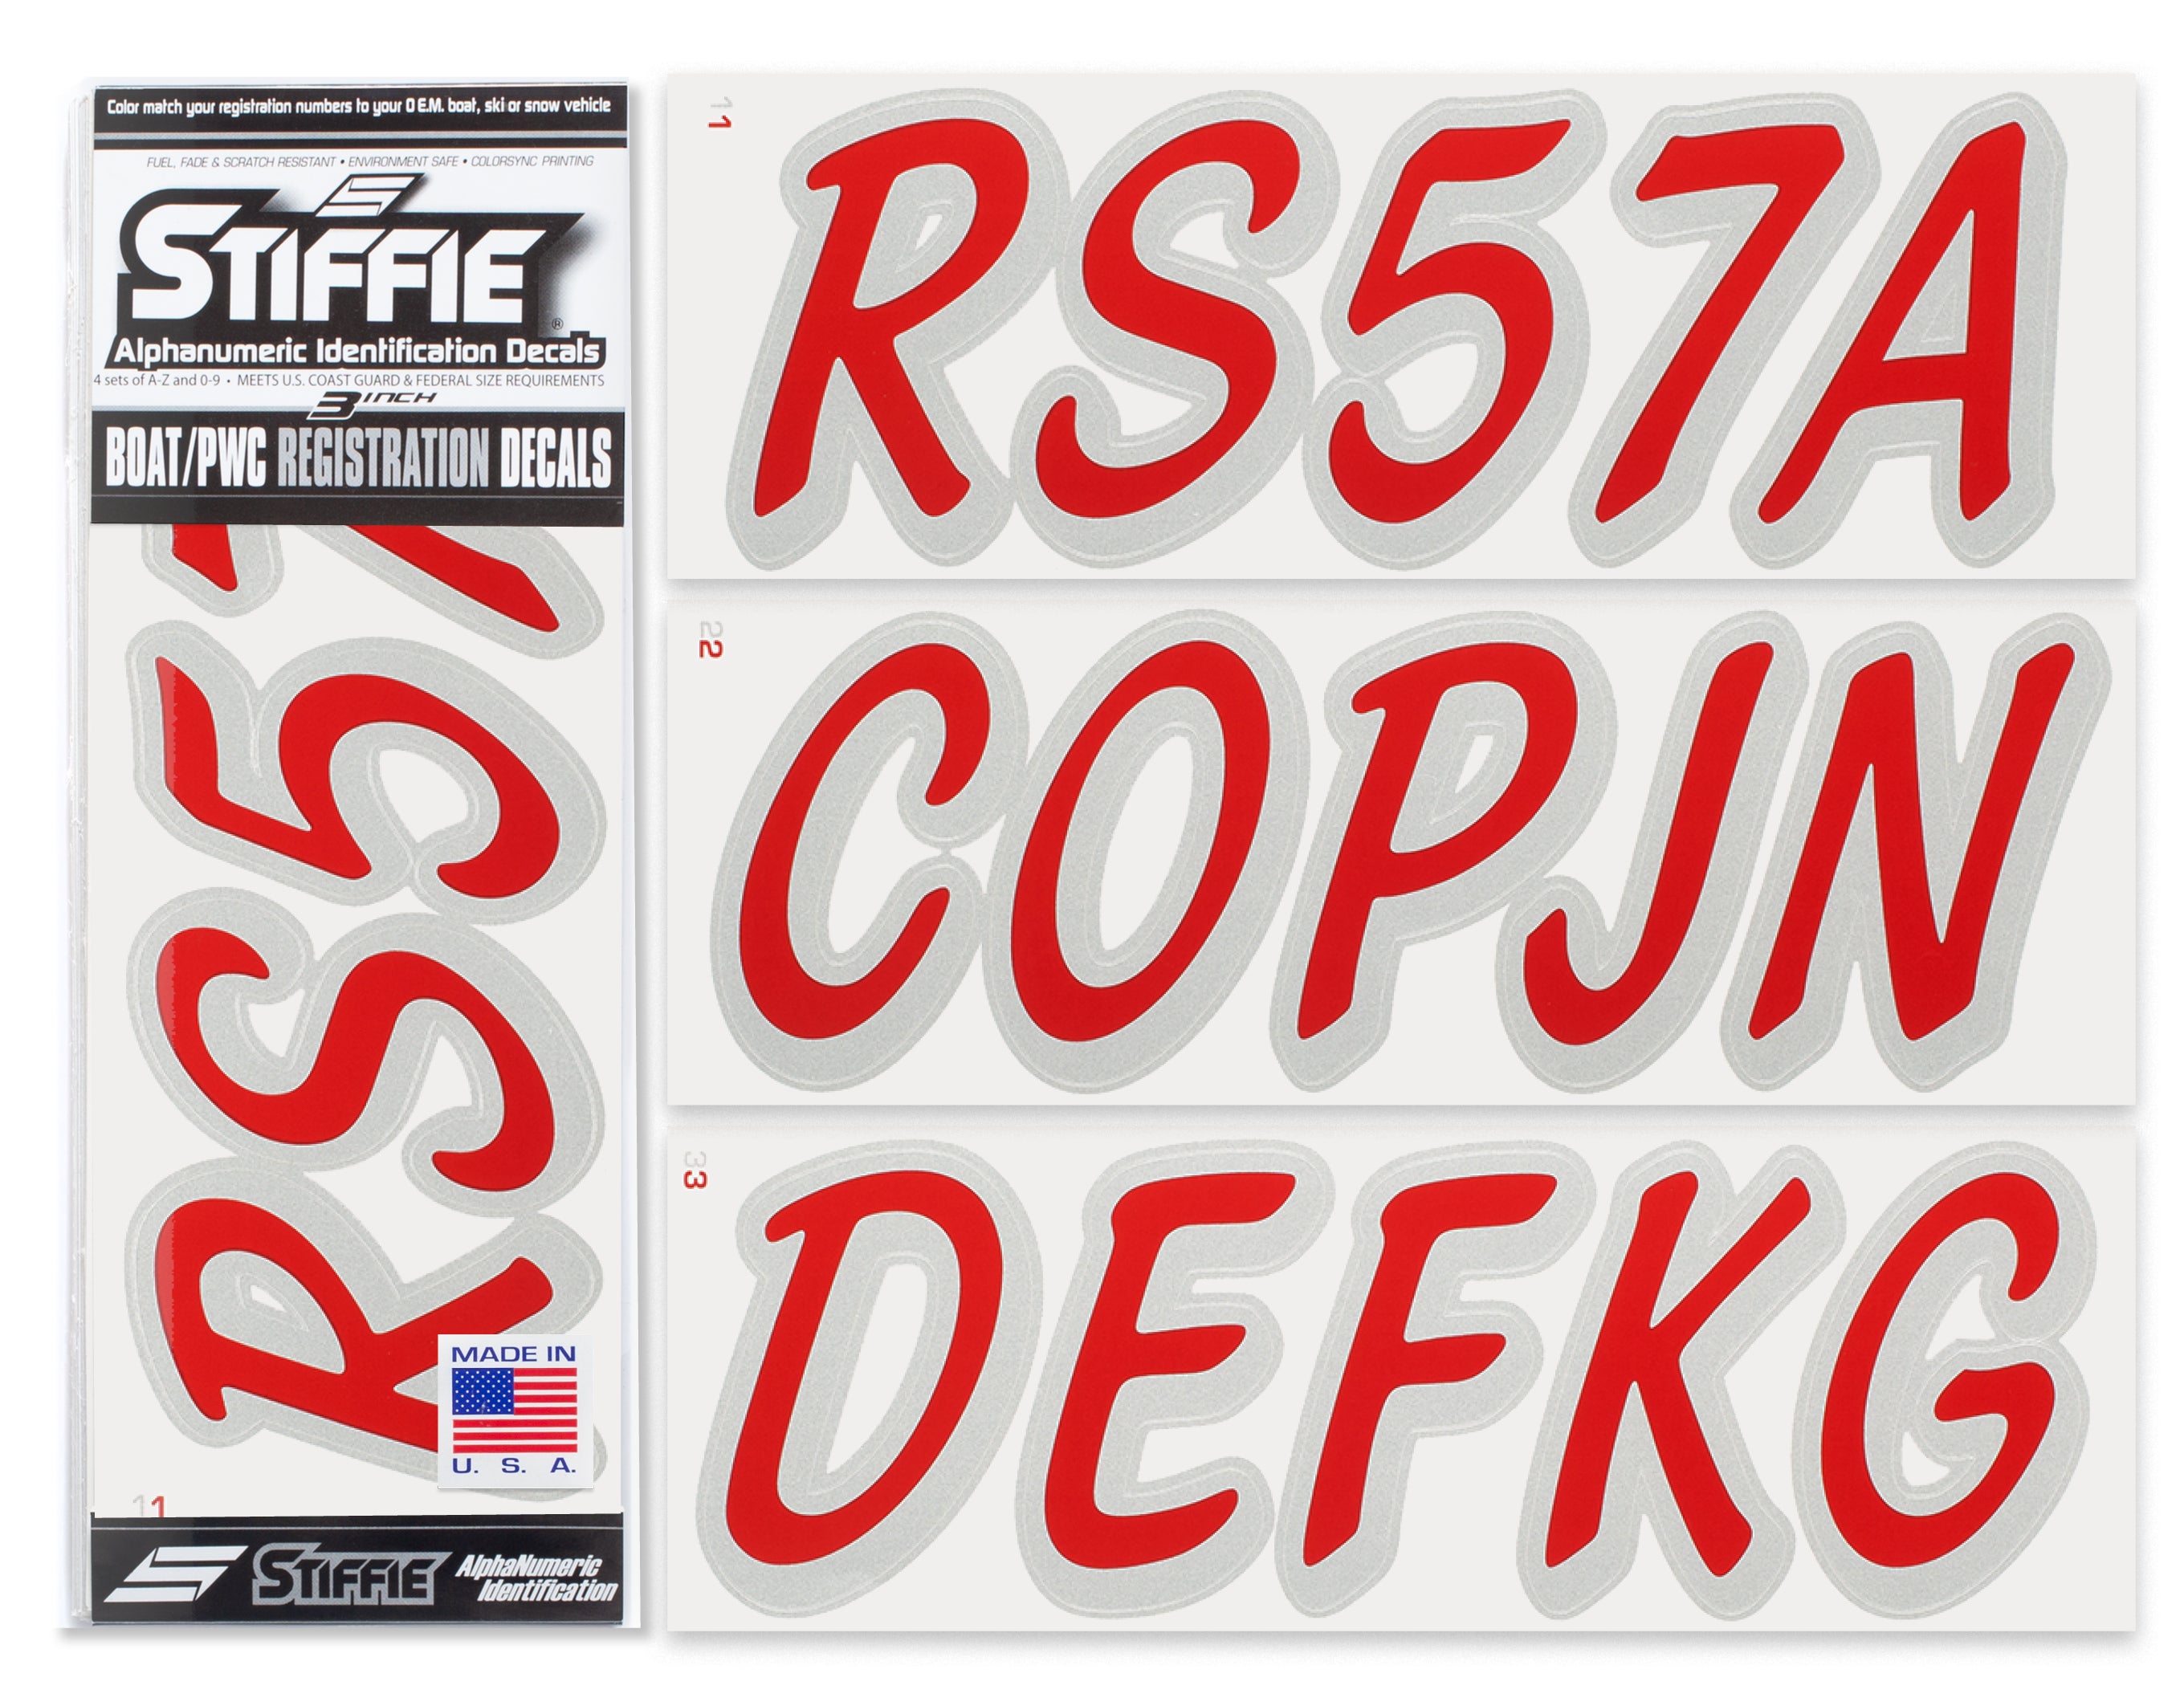 STIFFIE Whipline Solid Red/Metallic Silver 3" Alpha-Numeric Registration Identification Numbers Stickers Decals for Boats & Personal Watercraft